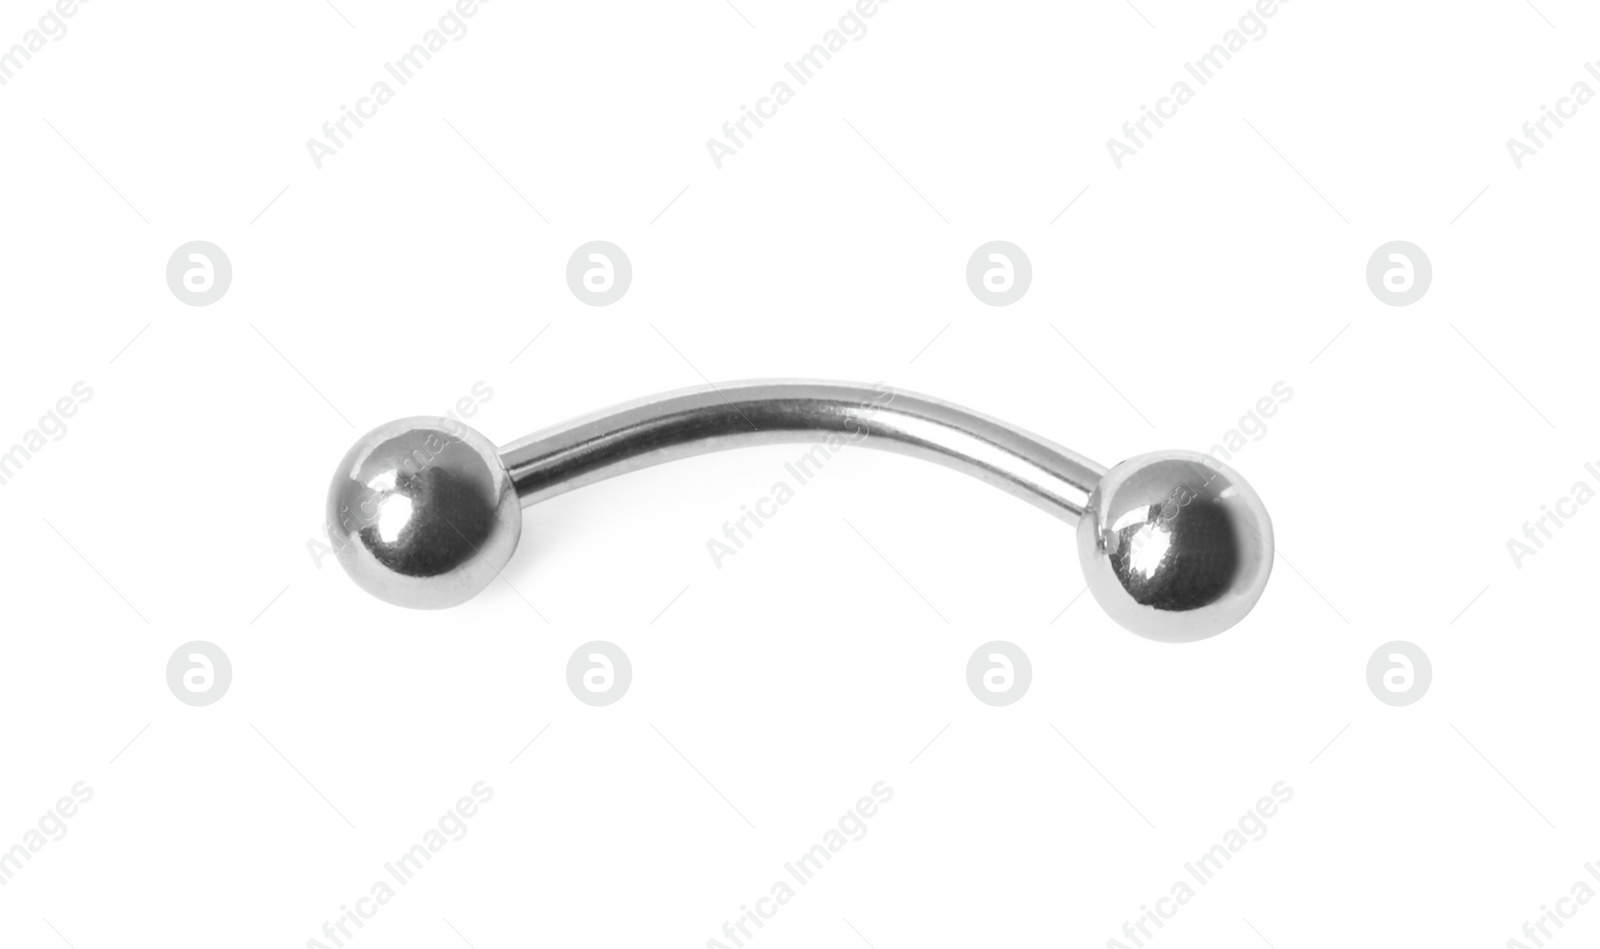 Photo of Piercing jewelry. Curved barbell isolated on white